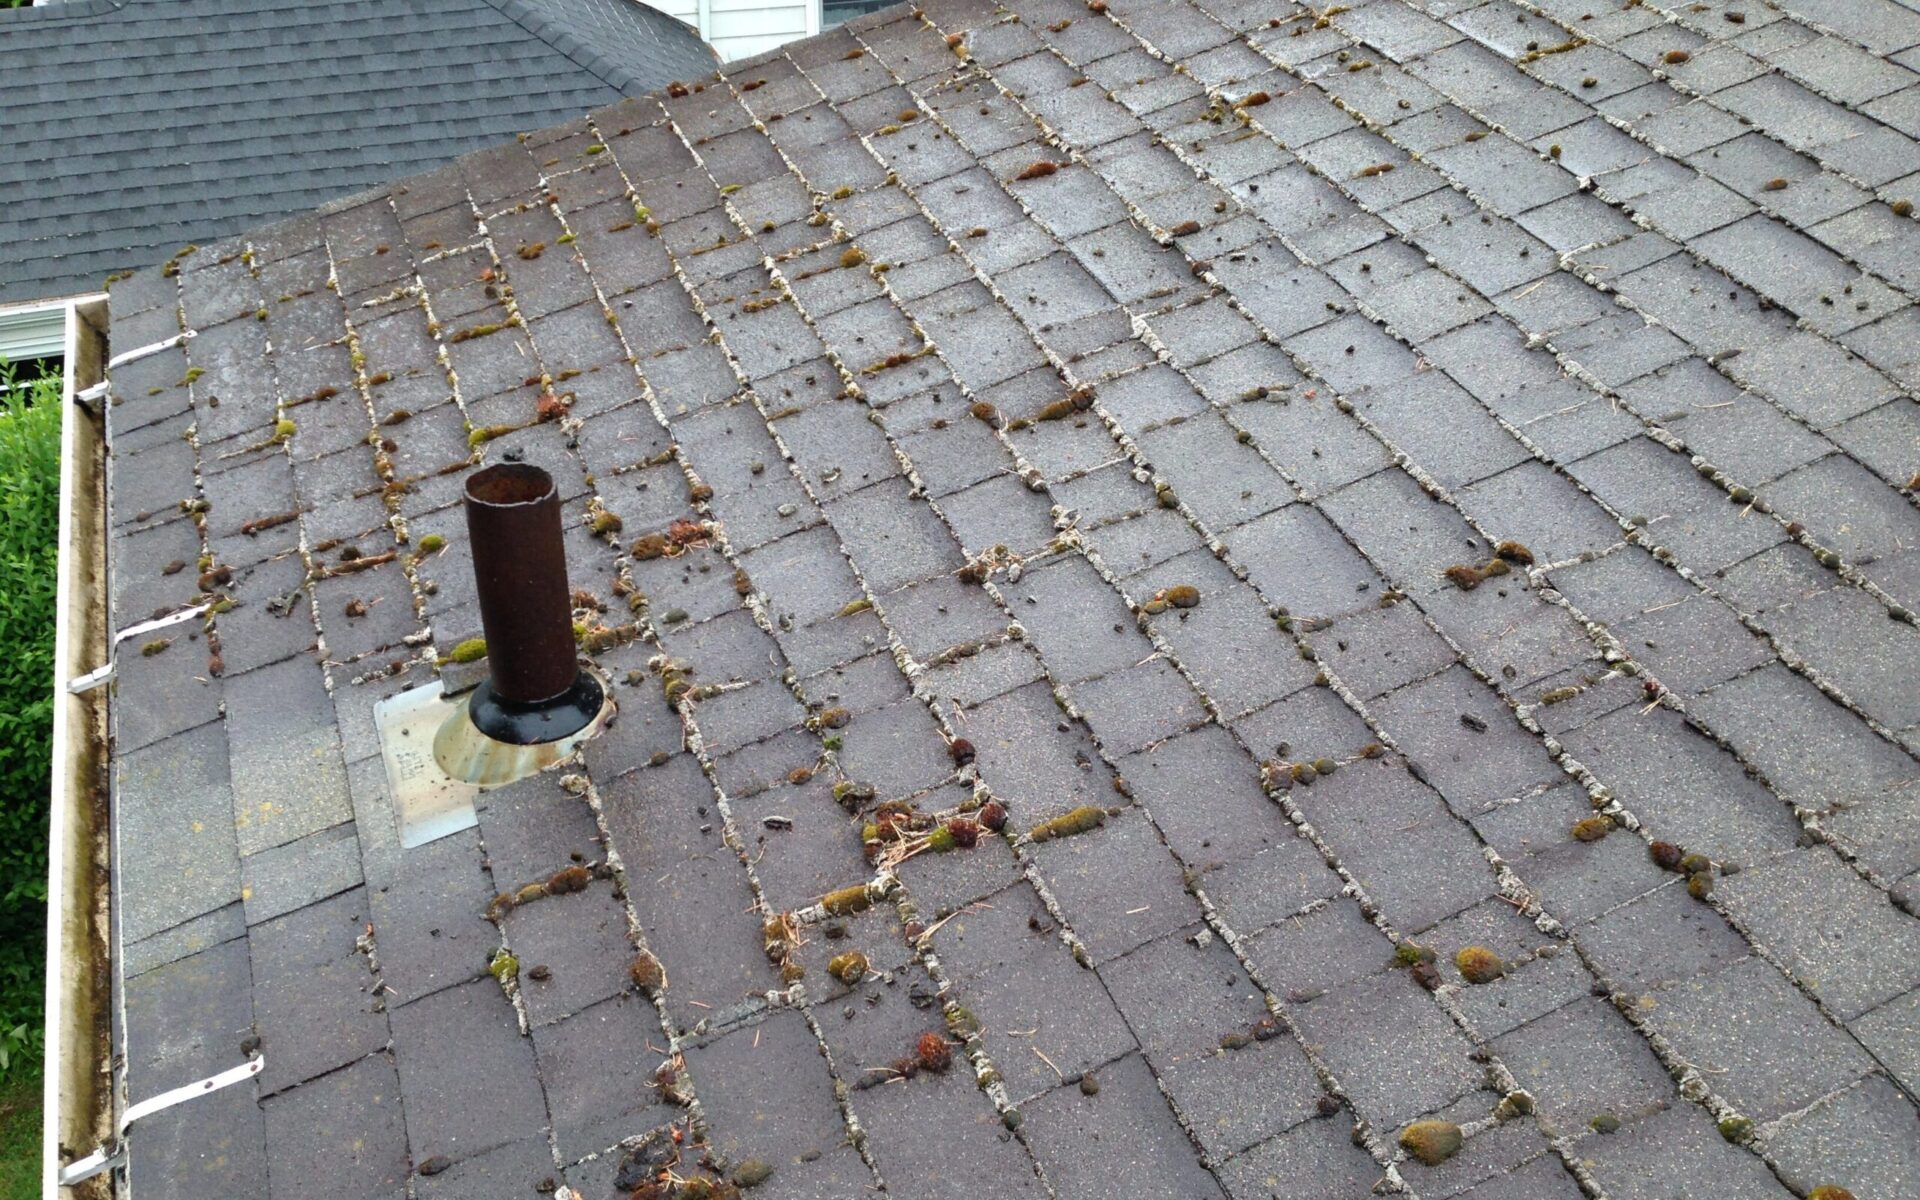 A weathered asphalt shingle roof with moss growing on it and a rusty metal vent pipe standing in one corner.